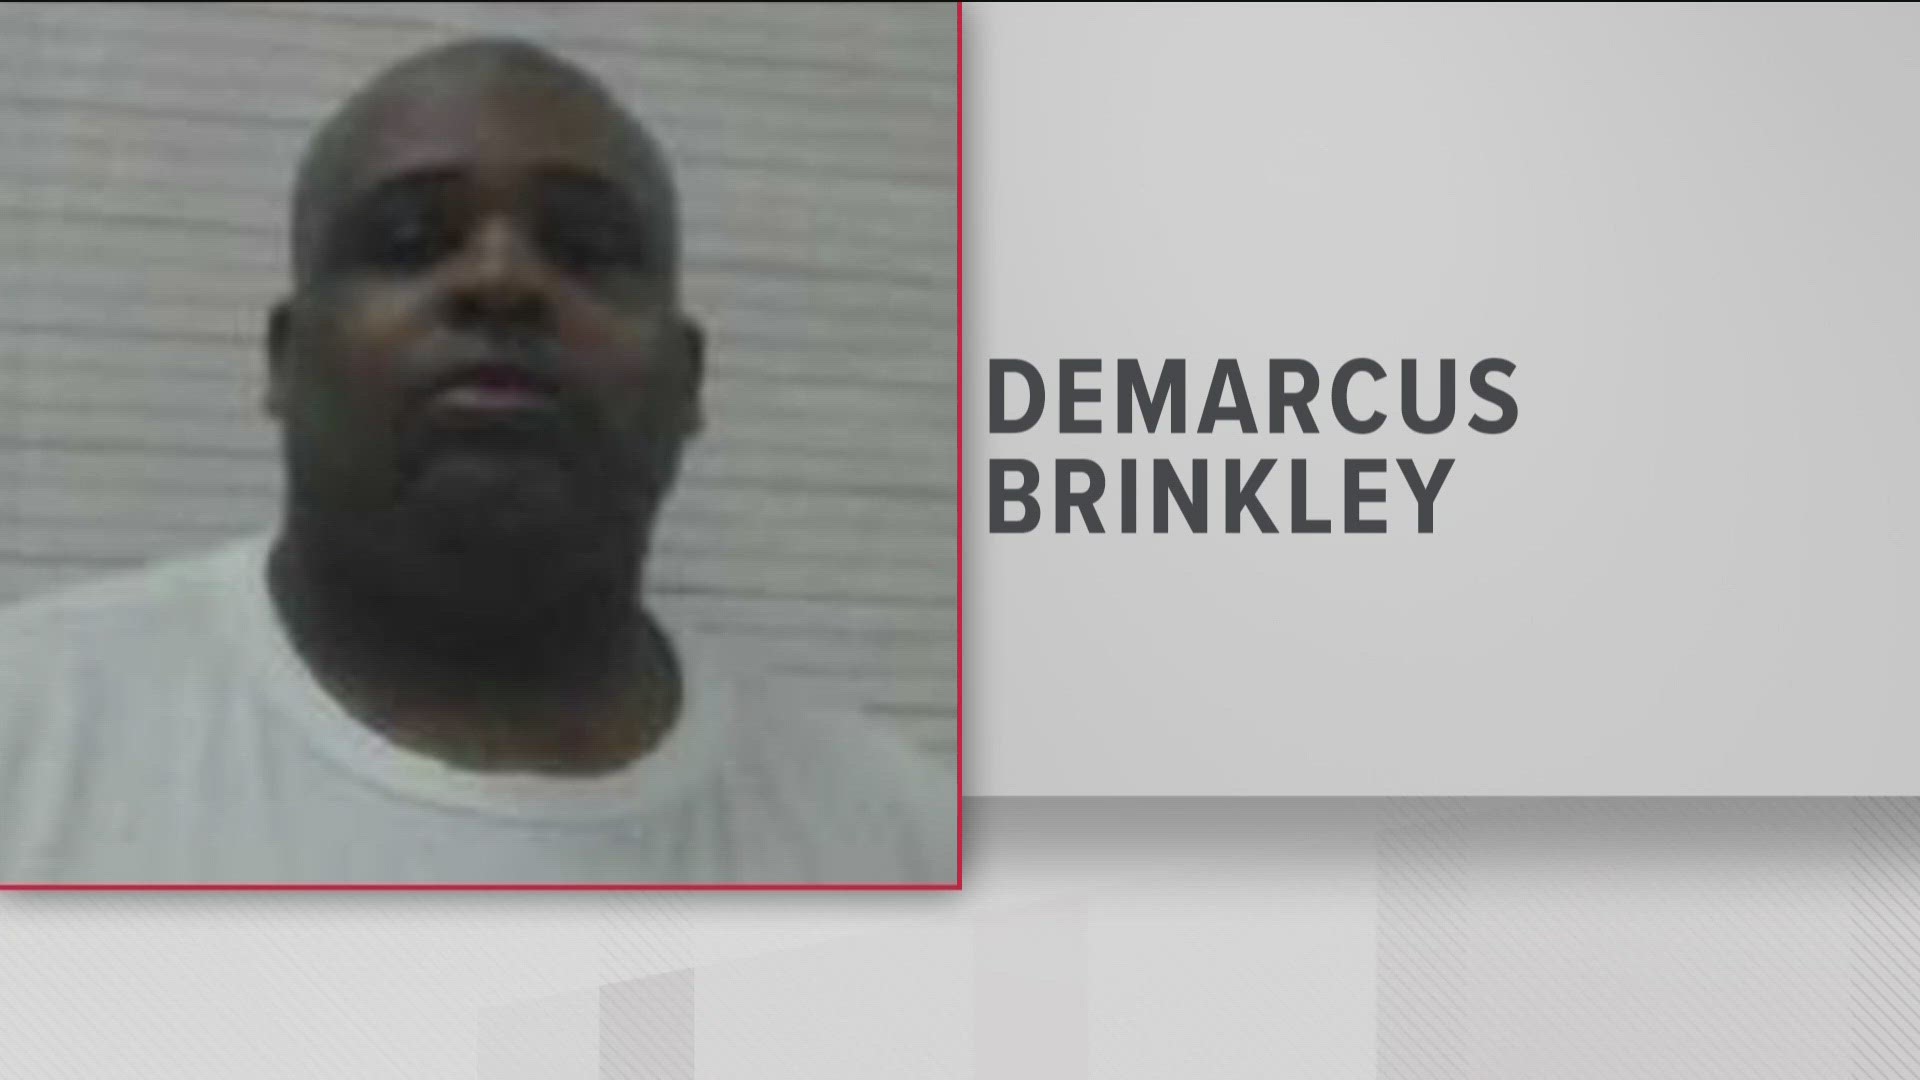 Demarcus Brinkley entered the state prison system on Thursday, records show, after a negotiated guilty plea in November.